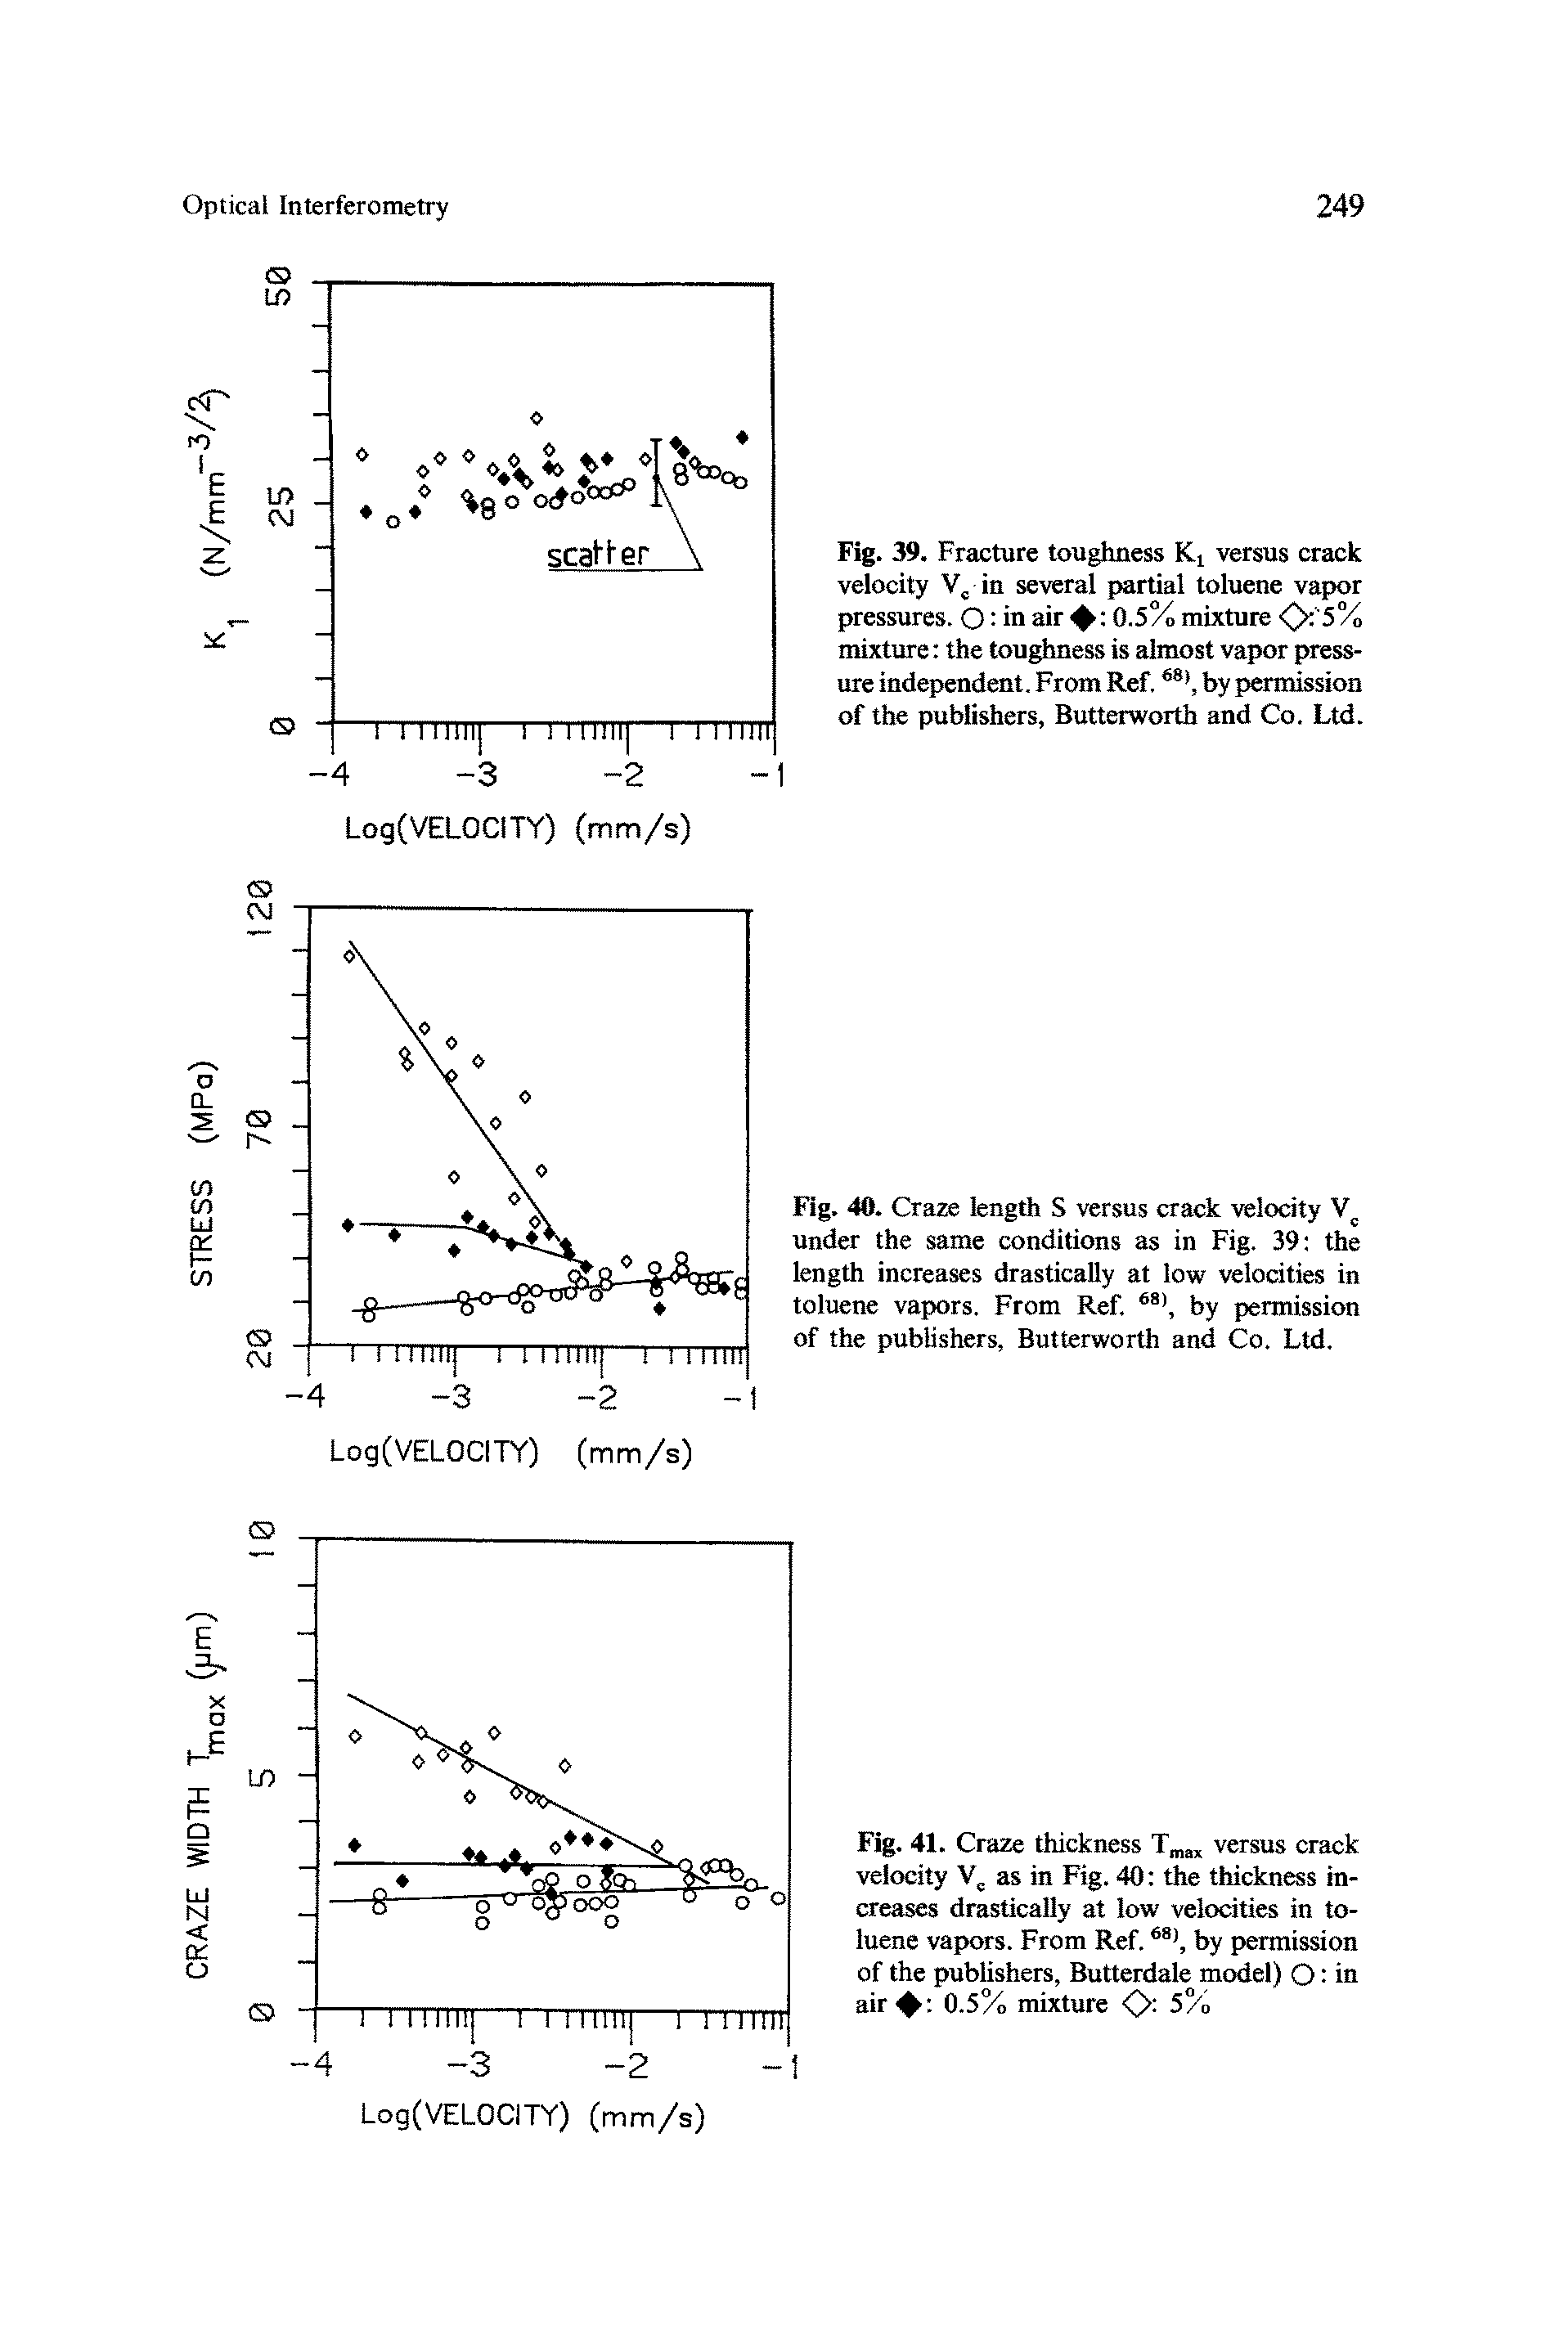 Fig. 39. Fracture toughness Ki versus crack velocity in several partial toluene vapor pressures. O in air 0.5% mixture 0> 5% mixture the toughness is almost vapor pressure independent. From Ref., by permission of the publishers, Butterworth and Co. Ltd.